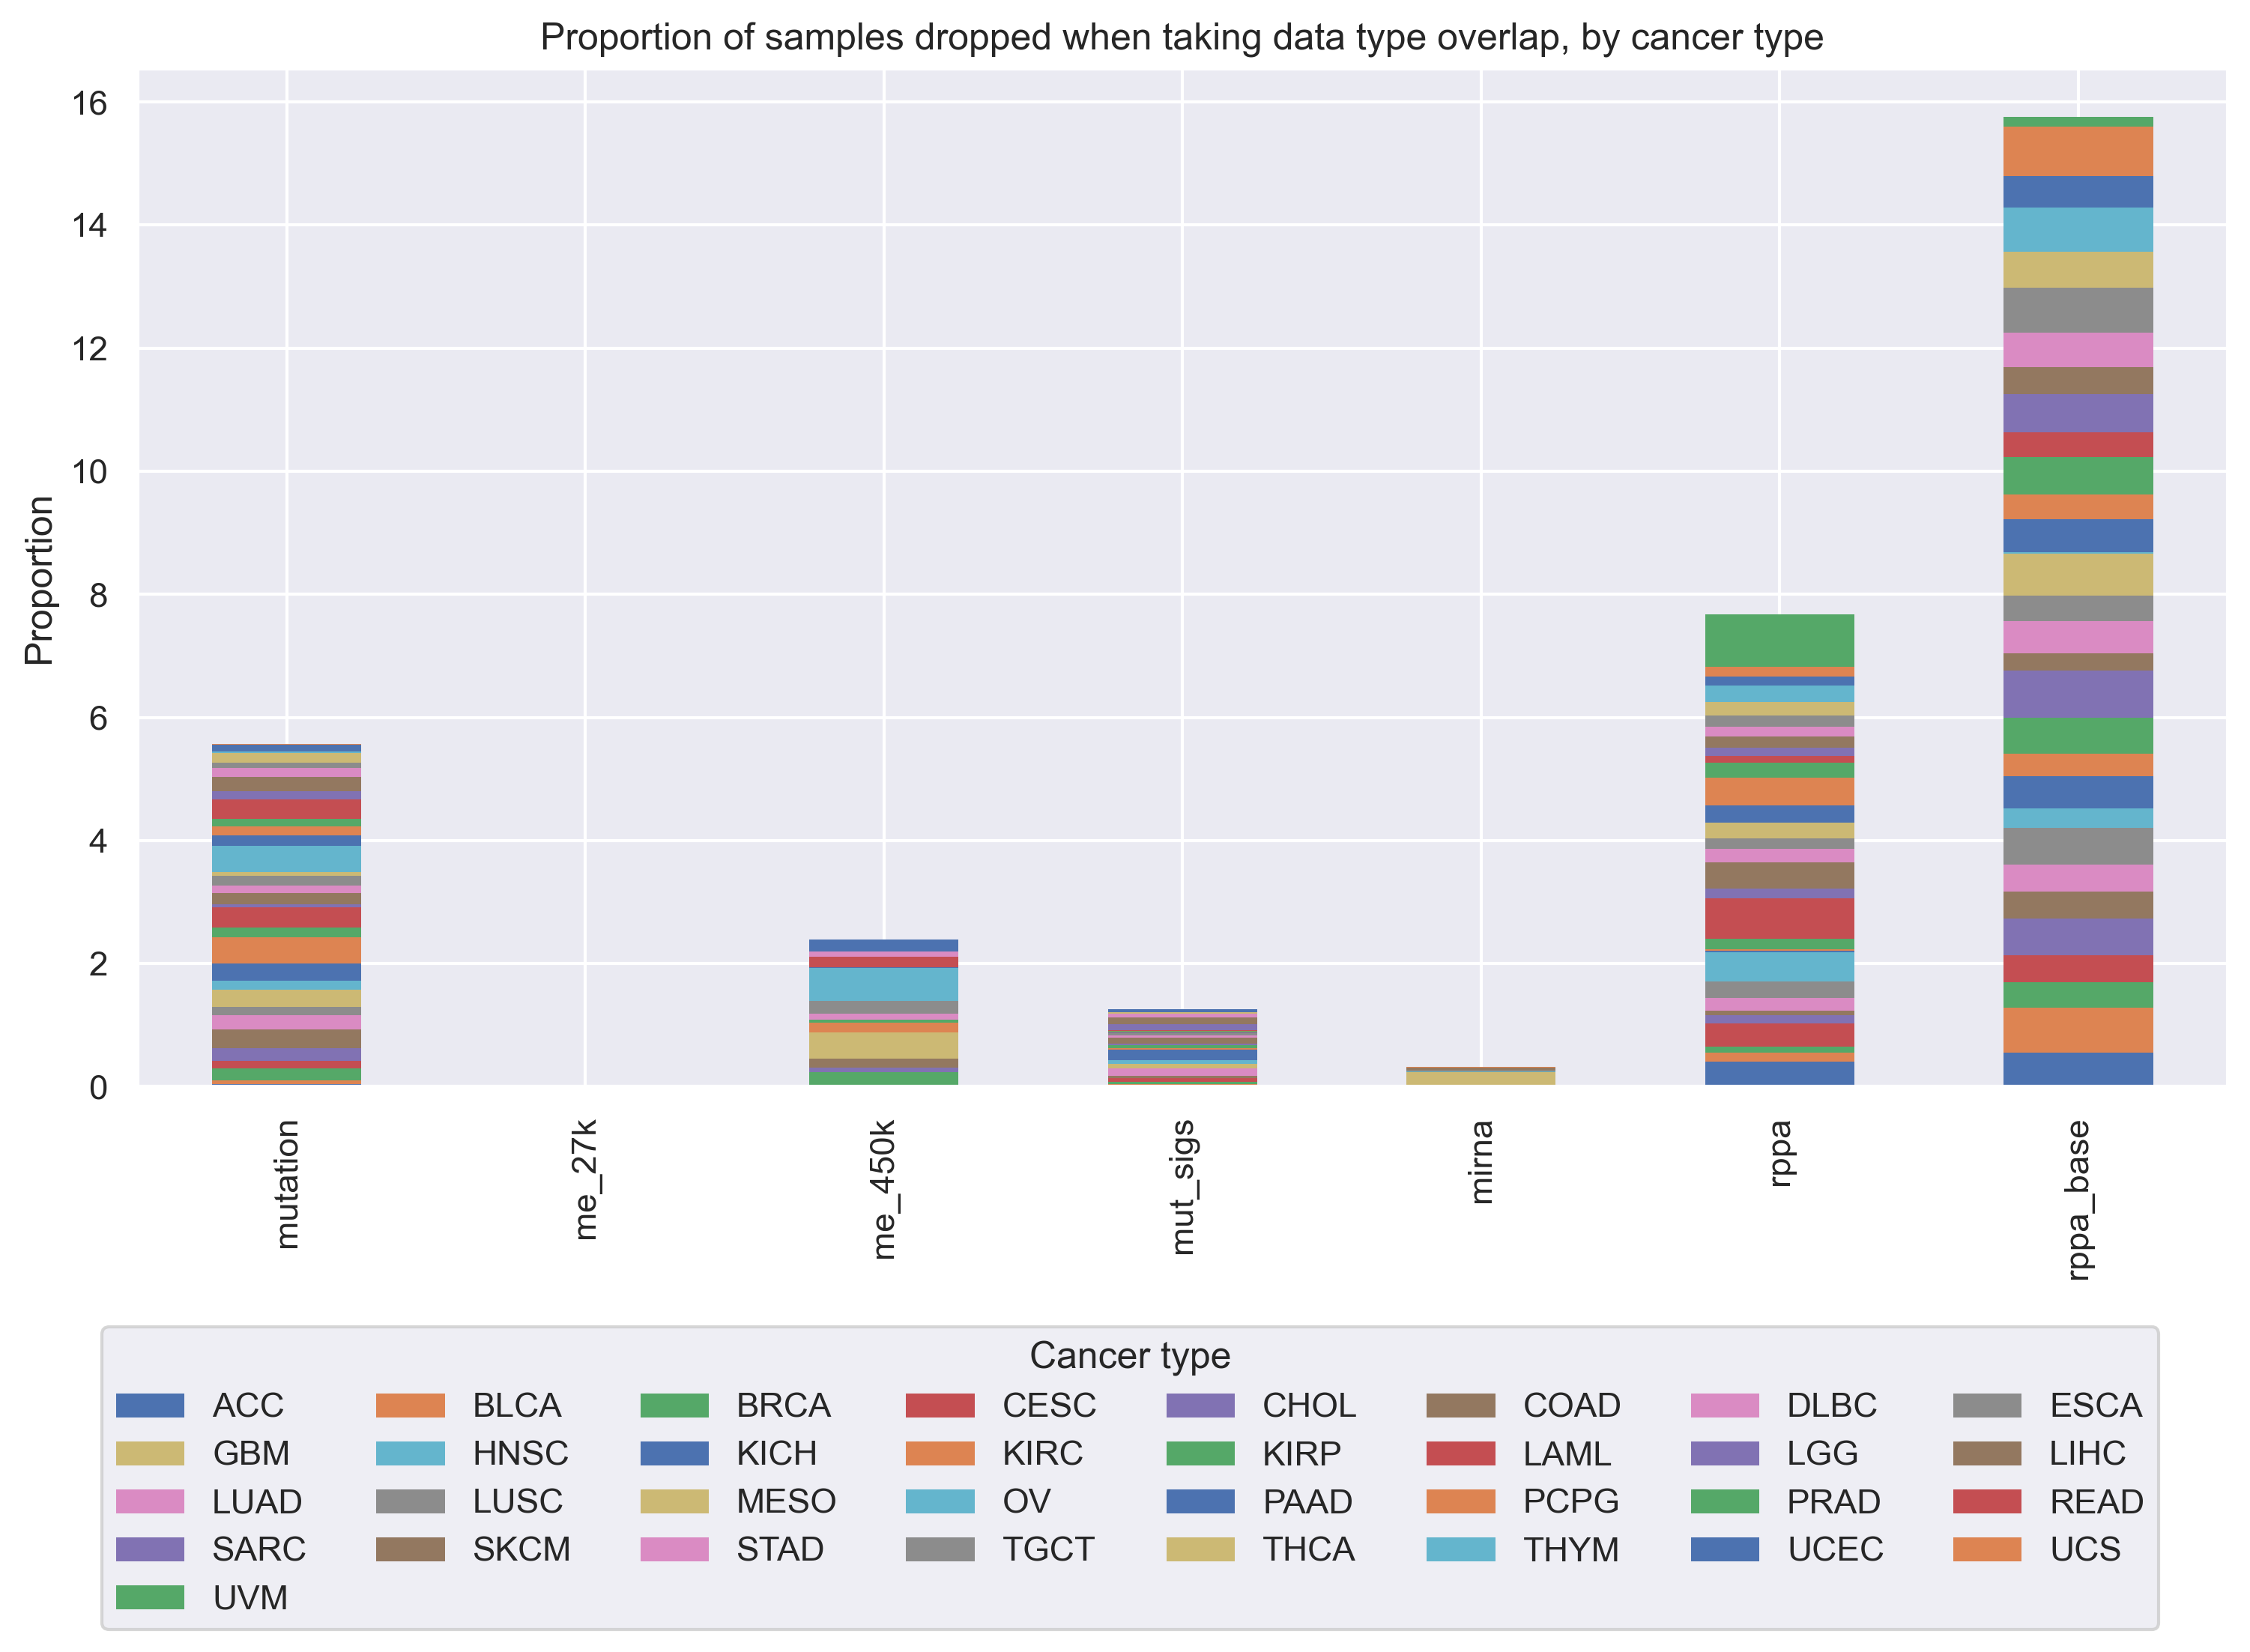 Figure S1: Proportion of samples from each TCGA cancer type that are “dropped” as more data types are added to our analyses. We started with gene expression data, and for each added data type, we took the intersection of samples that were profiled for that data type and the previous data types, dropping all samples that were missing 1 or more data types. Overall, at each step, the proportions of “dropped” samples appear to be fairly evenly spread between cancer types, showing that in general we are not disproportionately losing one or several cancer types as more data modalities are added to our analyses.